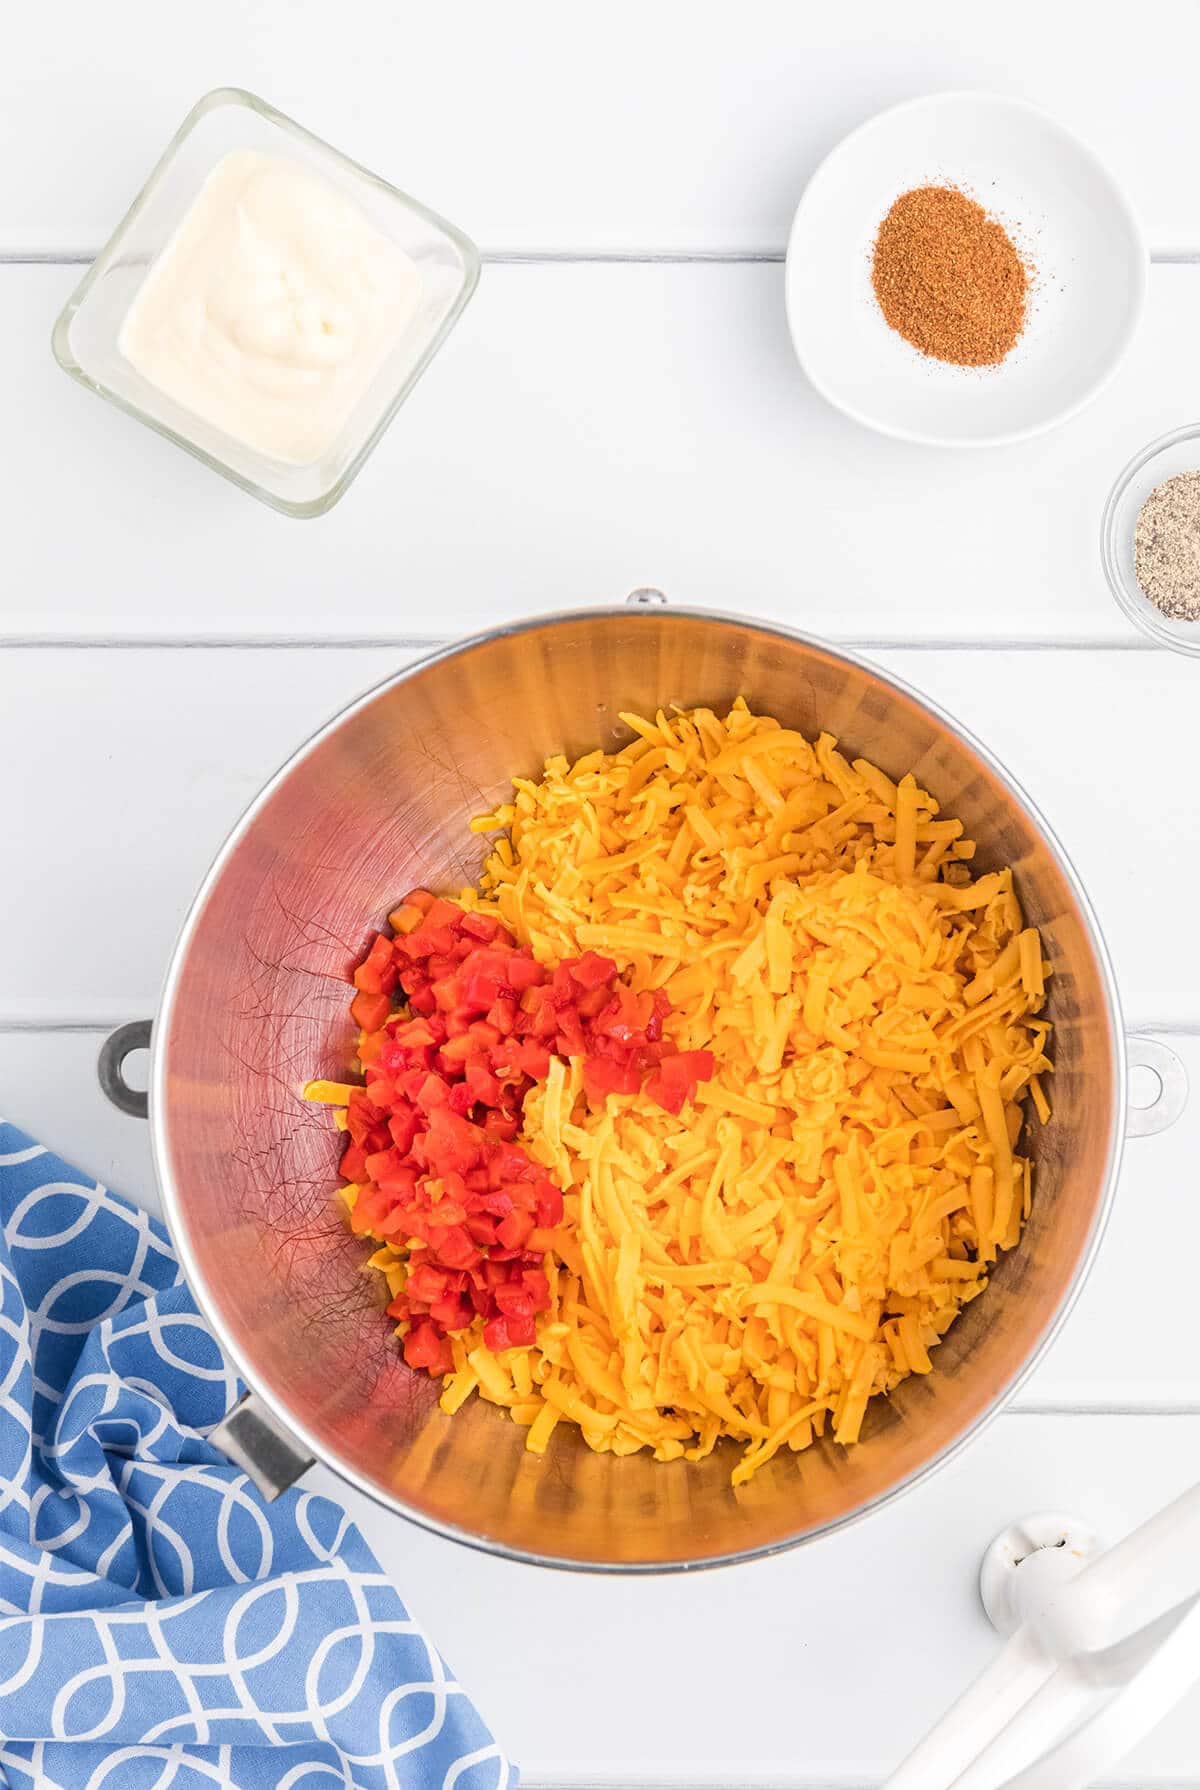 A stainless steel mixing bowl filled with grated cheese and red pimentos.